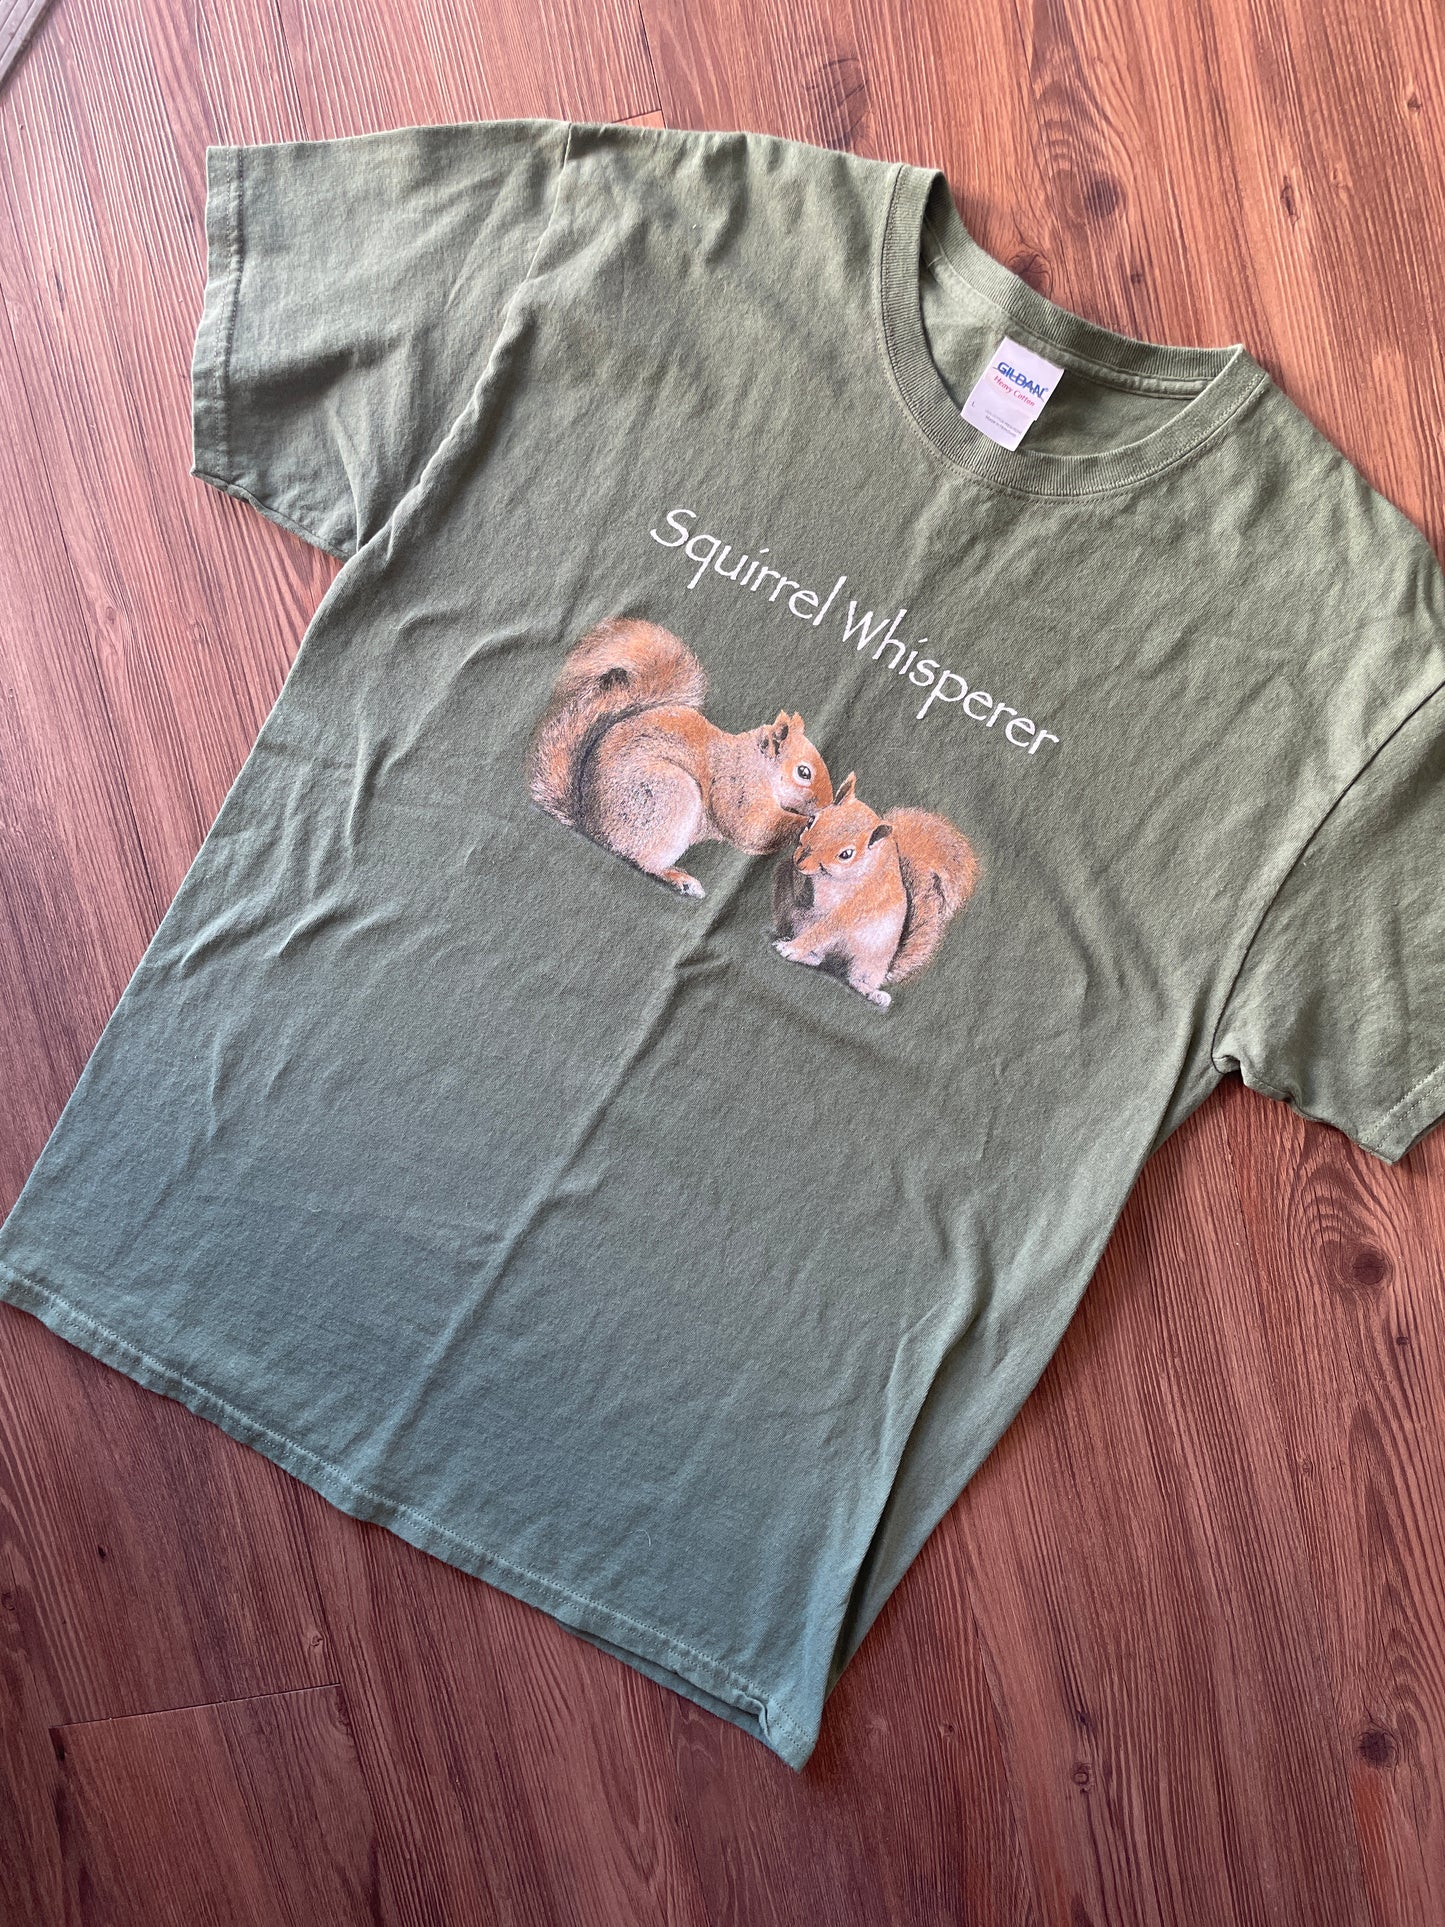 Large Men's Squirrel Whisperer Forest Green Short Sleeve T-Shirt | READY TO TIE DYE